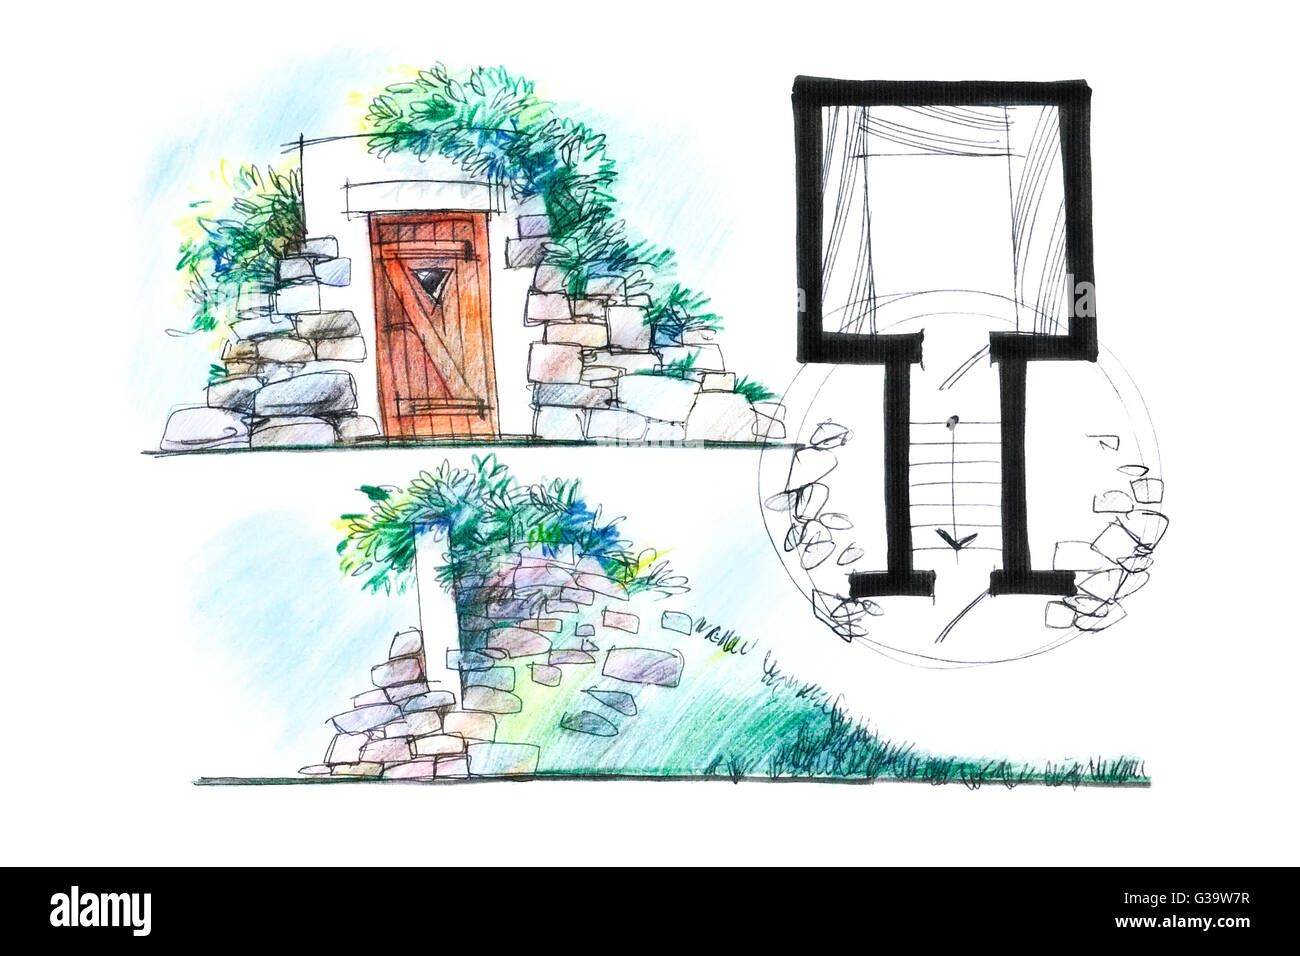 architect crayon sketch of a cellar for food storage in a country house from different angles Stock Photo